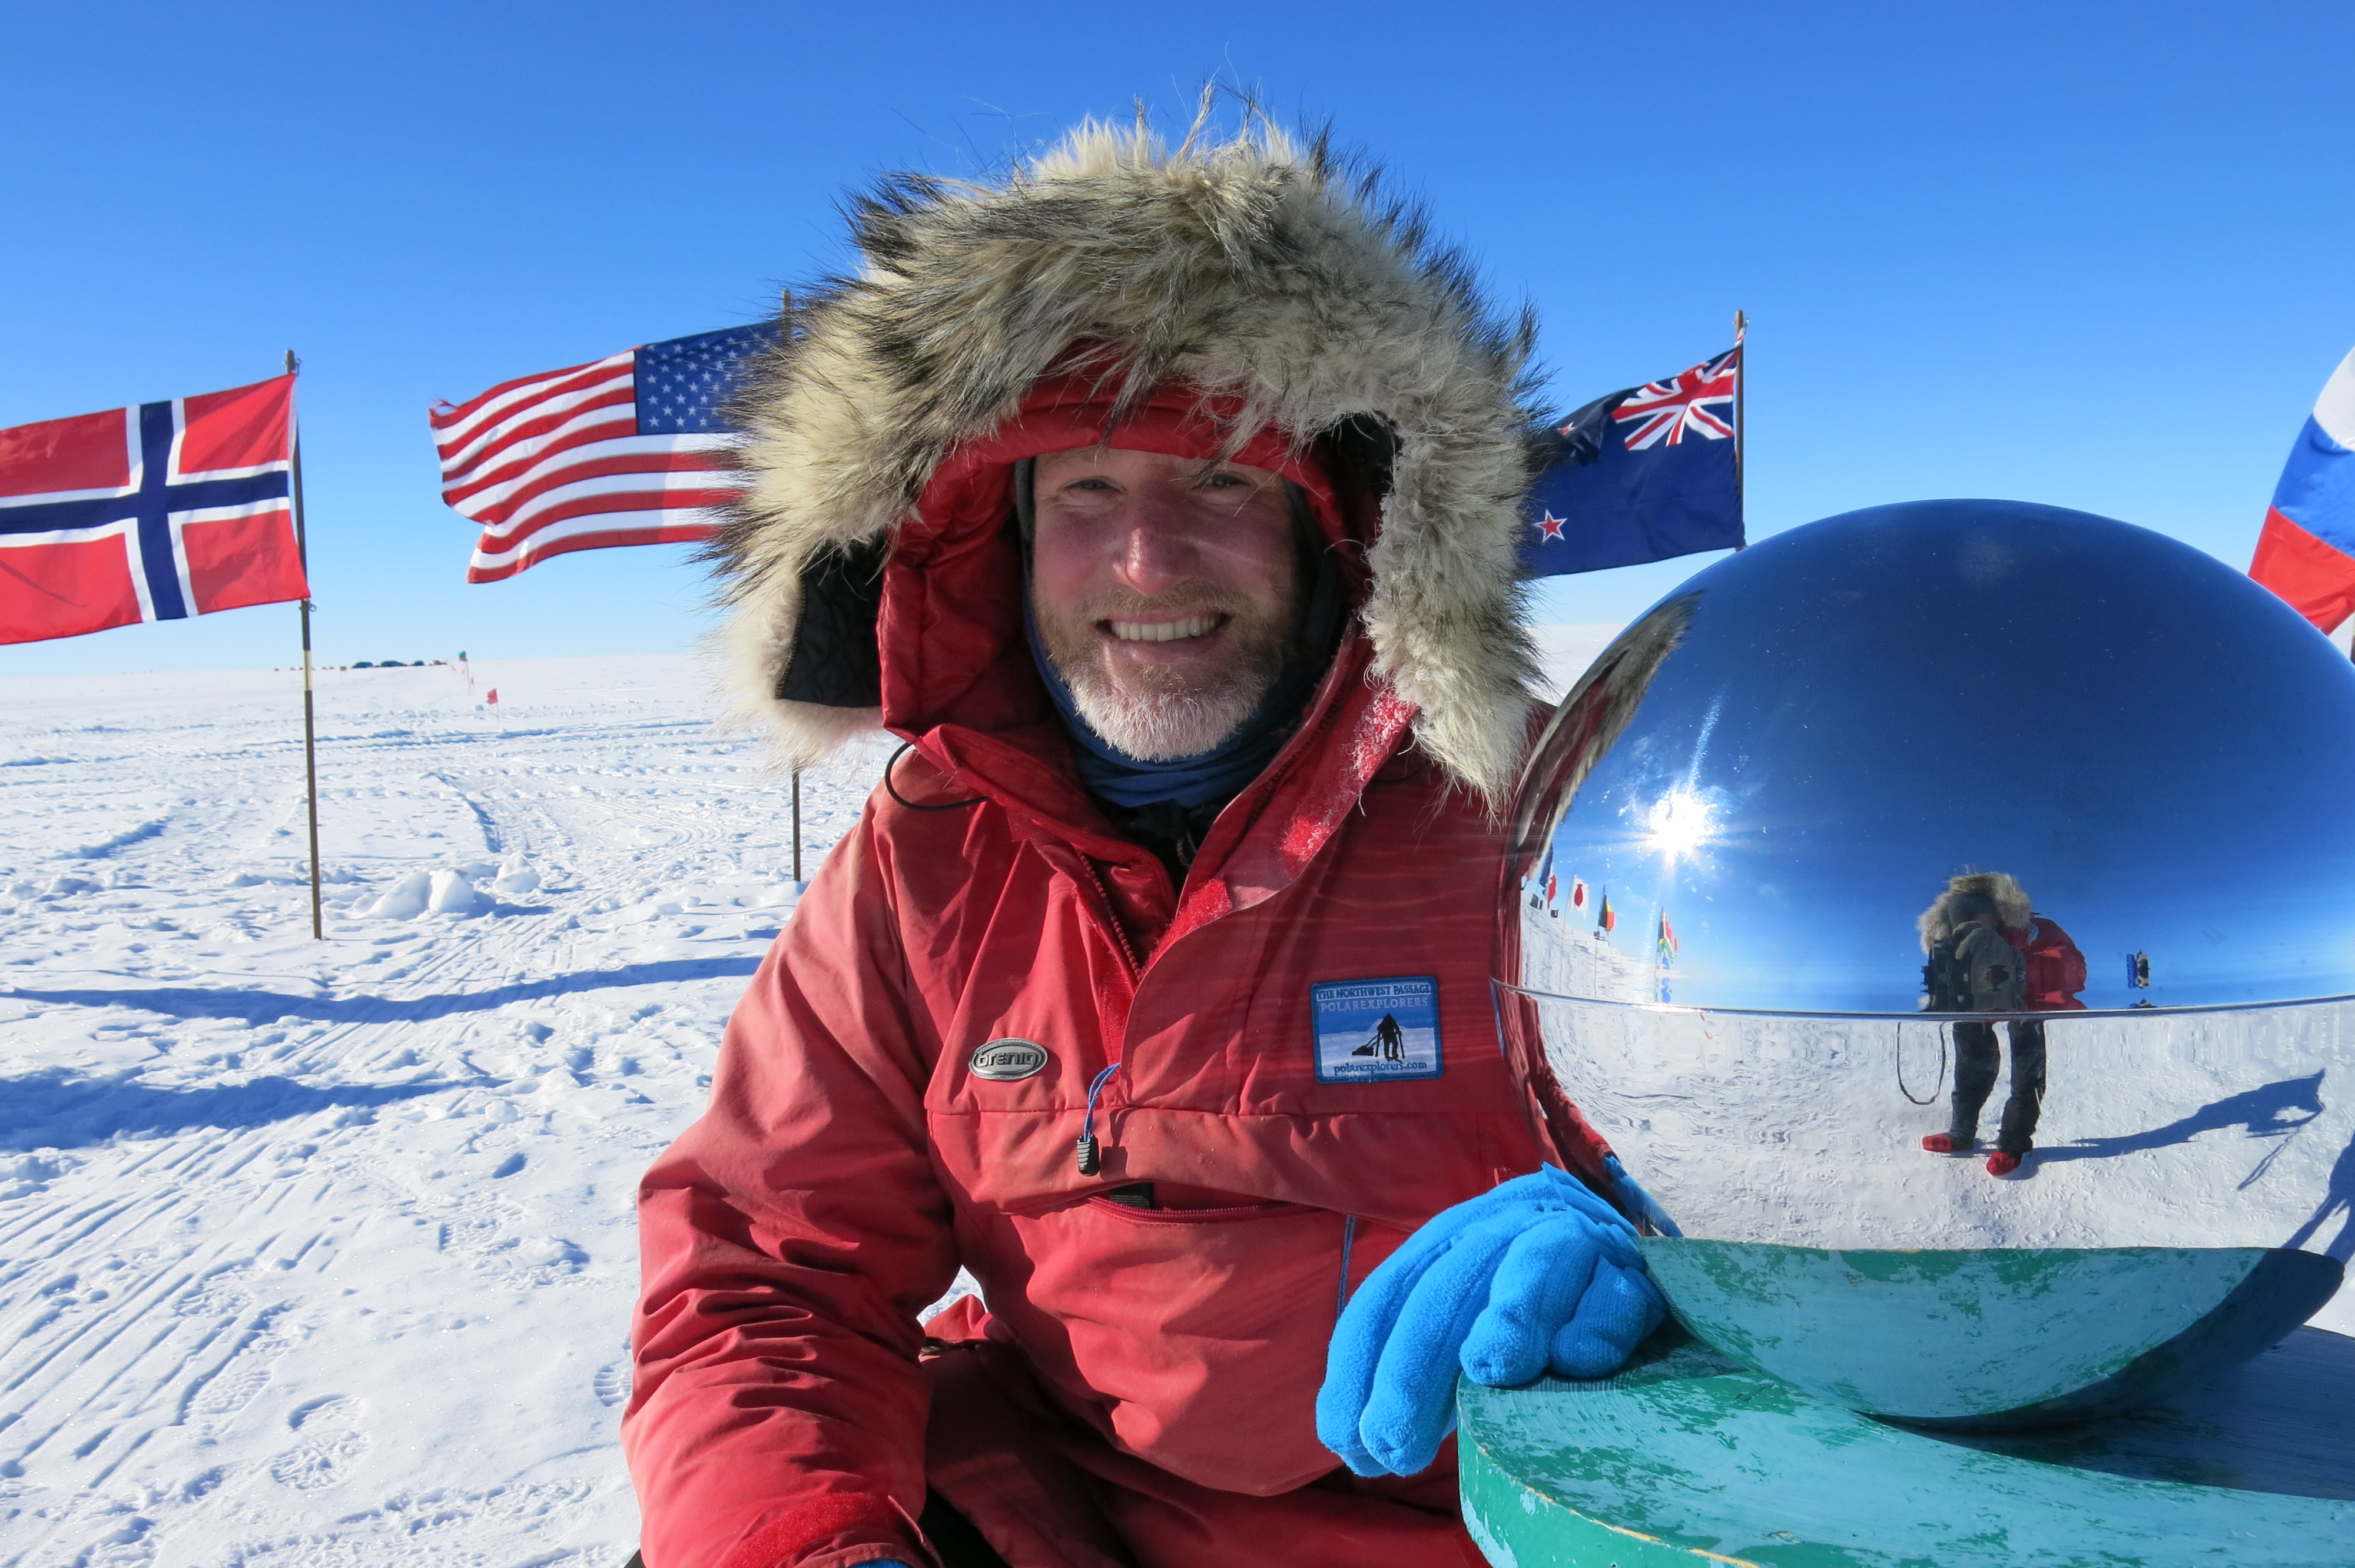 Keith Heger, expedition leader